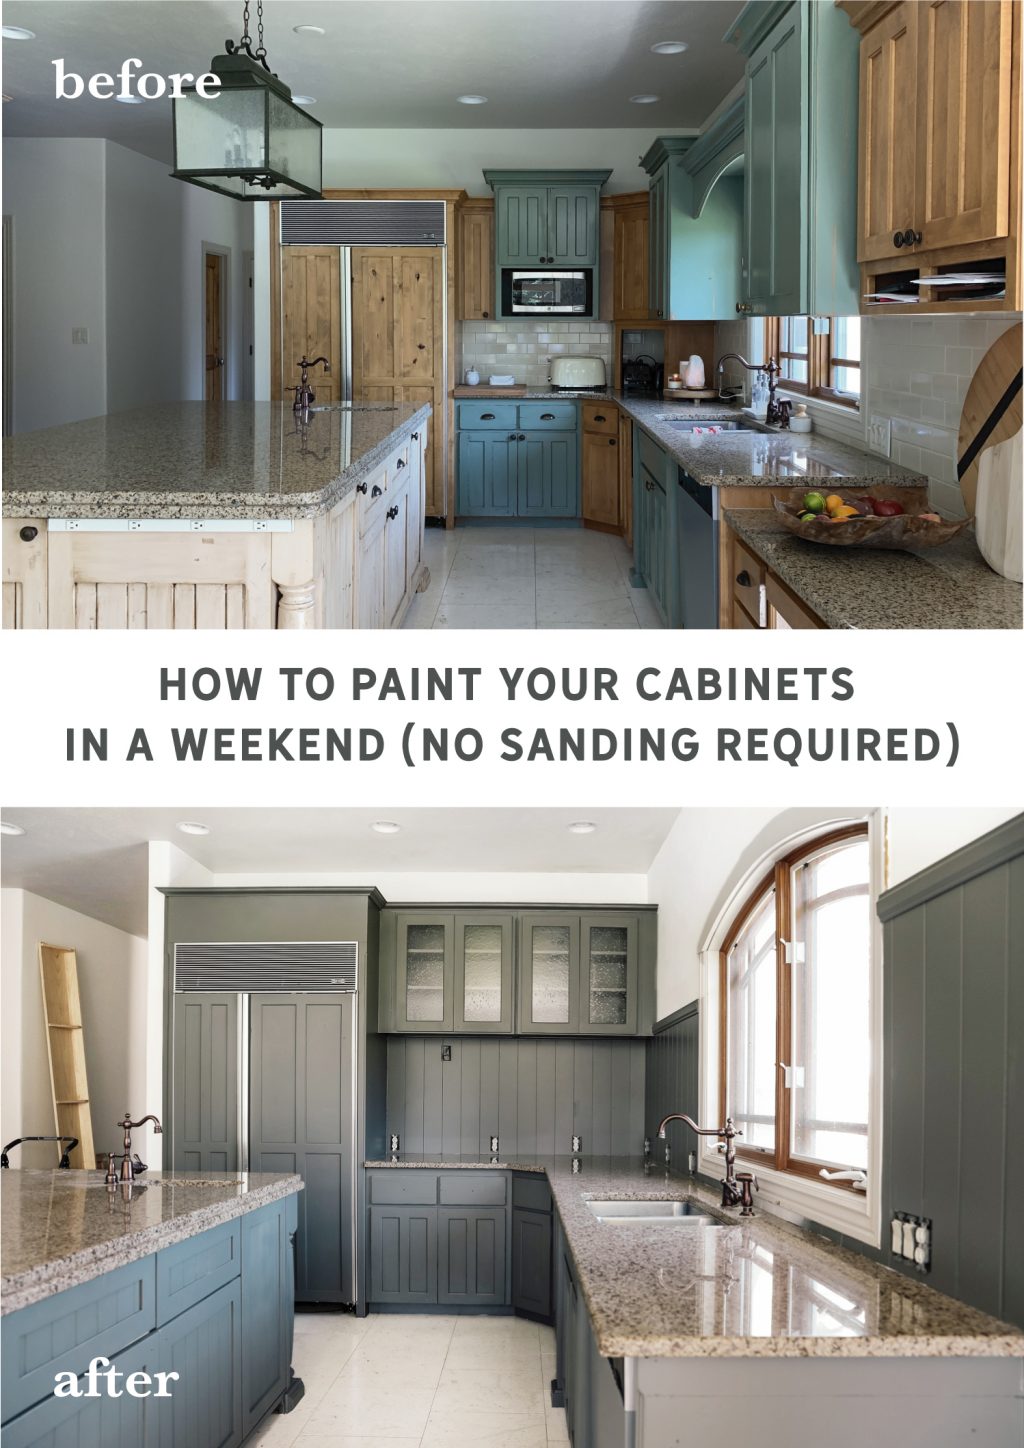 How To Paint Your Cabinets In A Weekend, Does Milk Paint Hold Up On Kitchen Cabinets